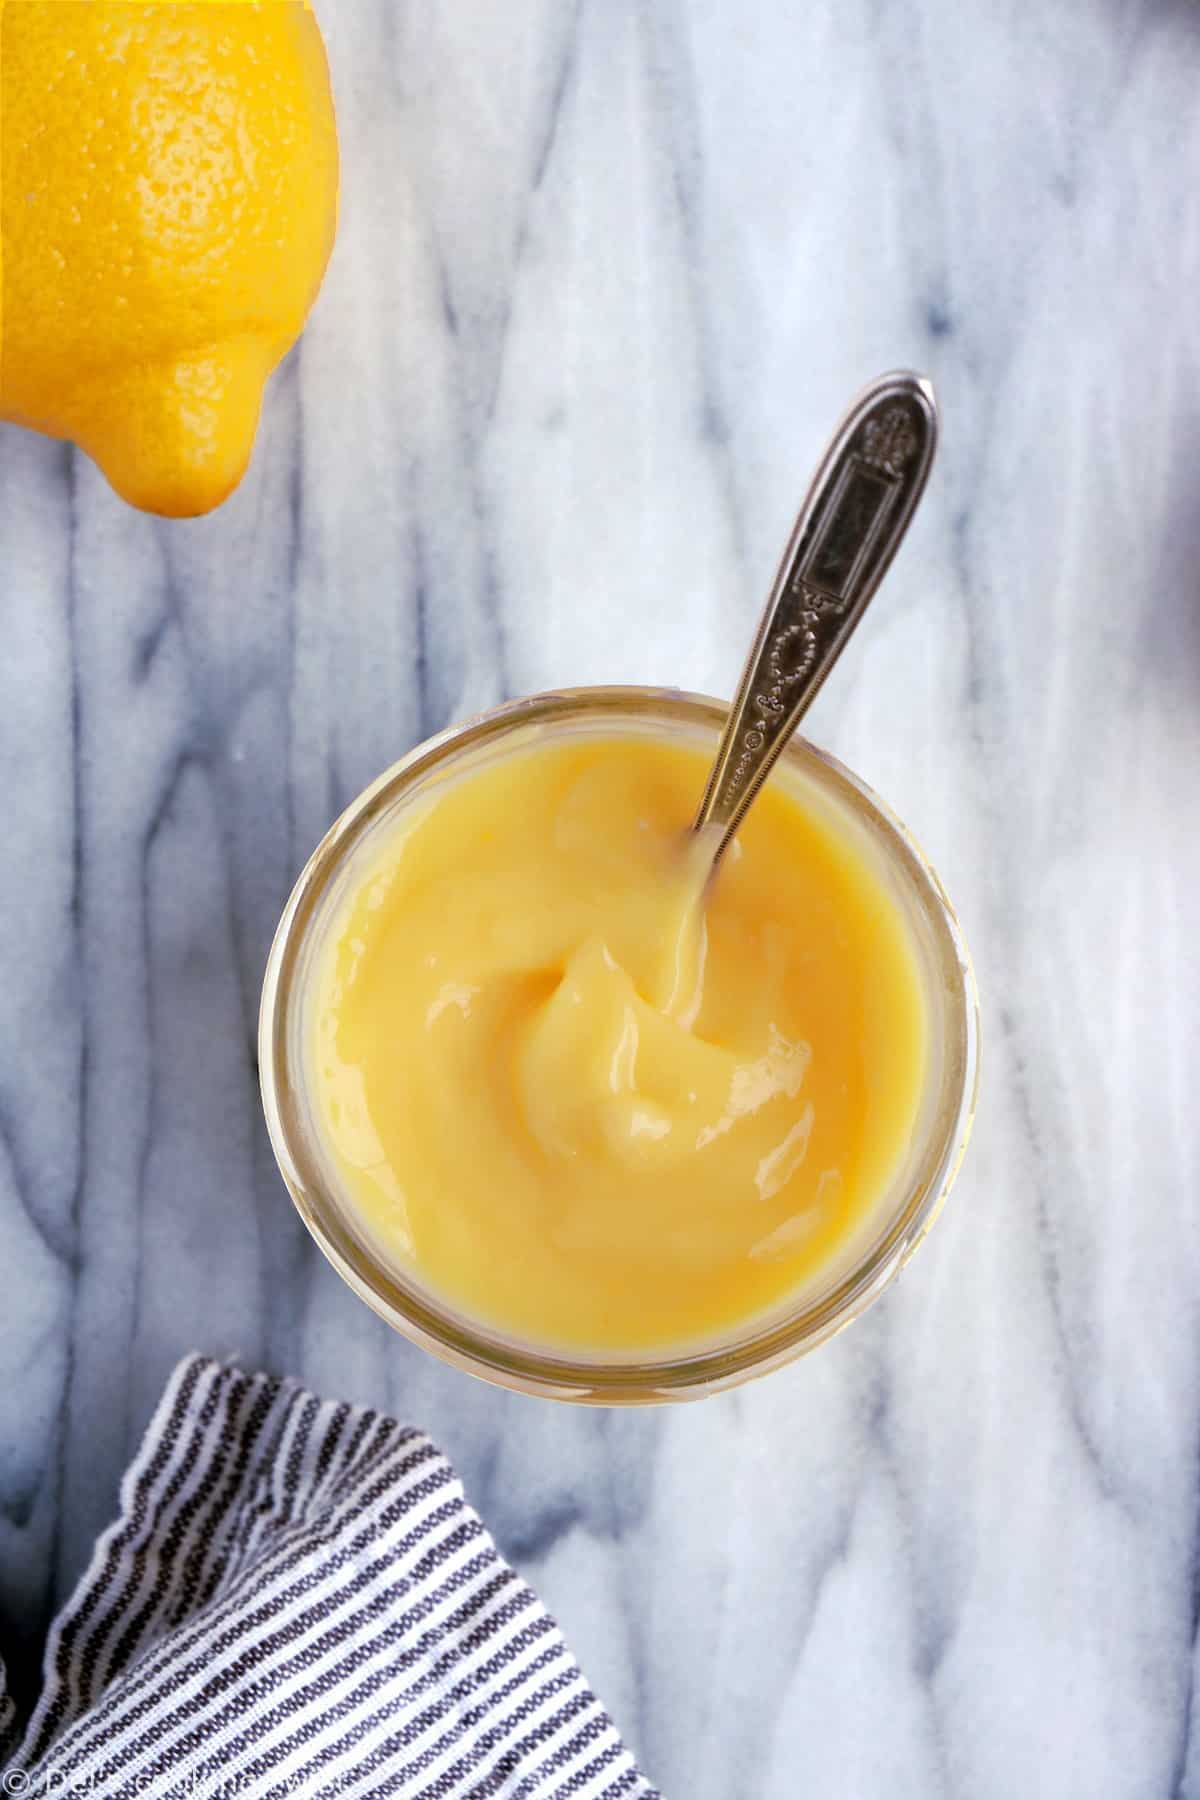 Homemade lemon curd recipe is incredibly easy to prepare. With only 5 ingredients, you get a perfectly sweet and tangy flavor with such a creamy texture. The perfect spread with scones, cakes and pancakes.